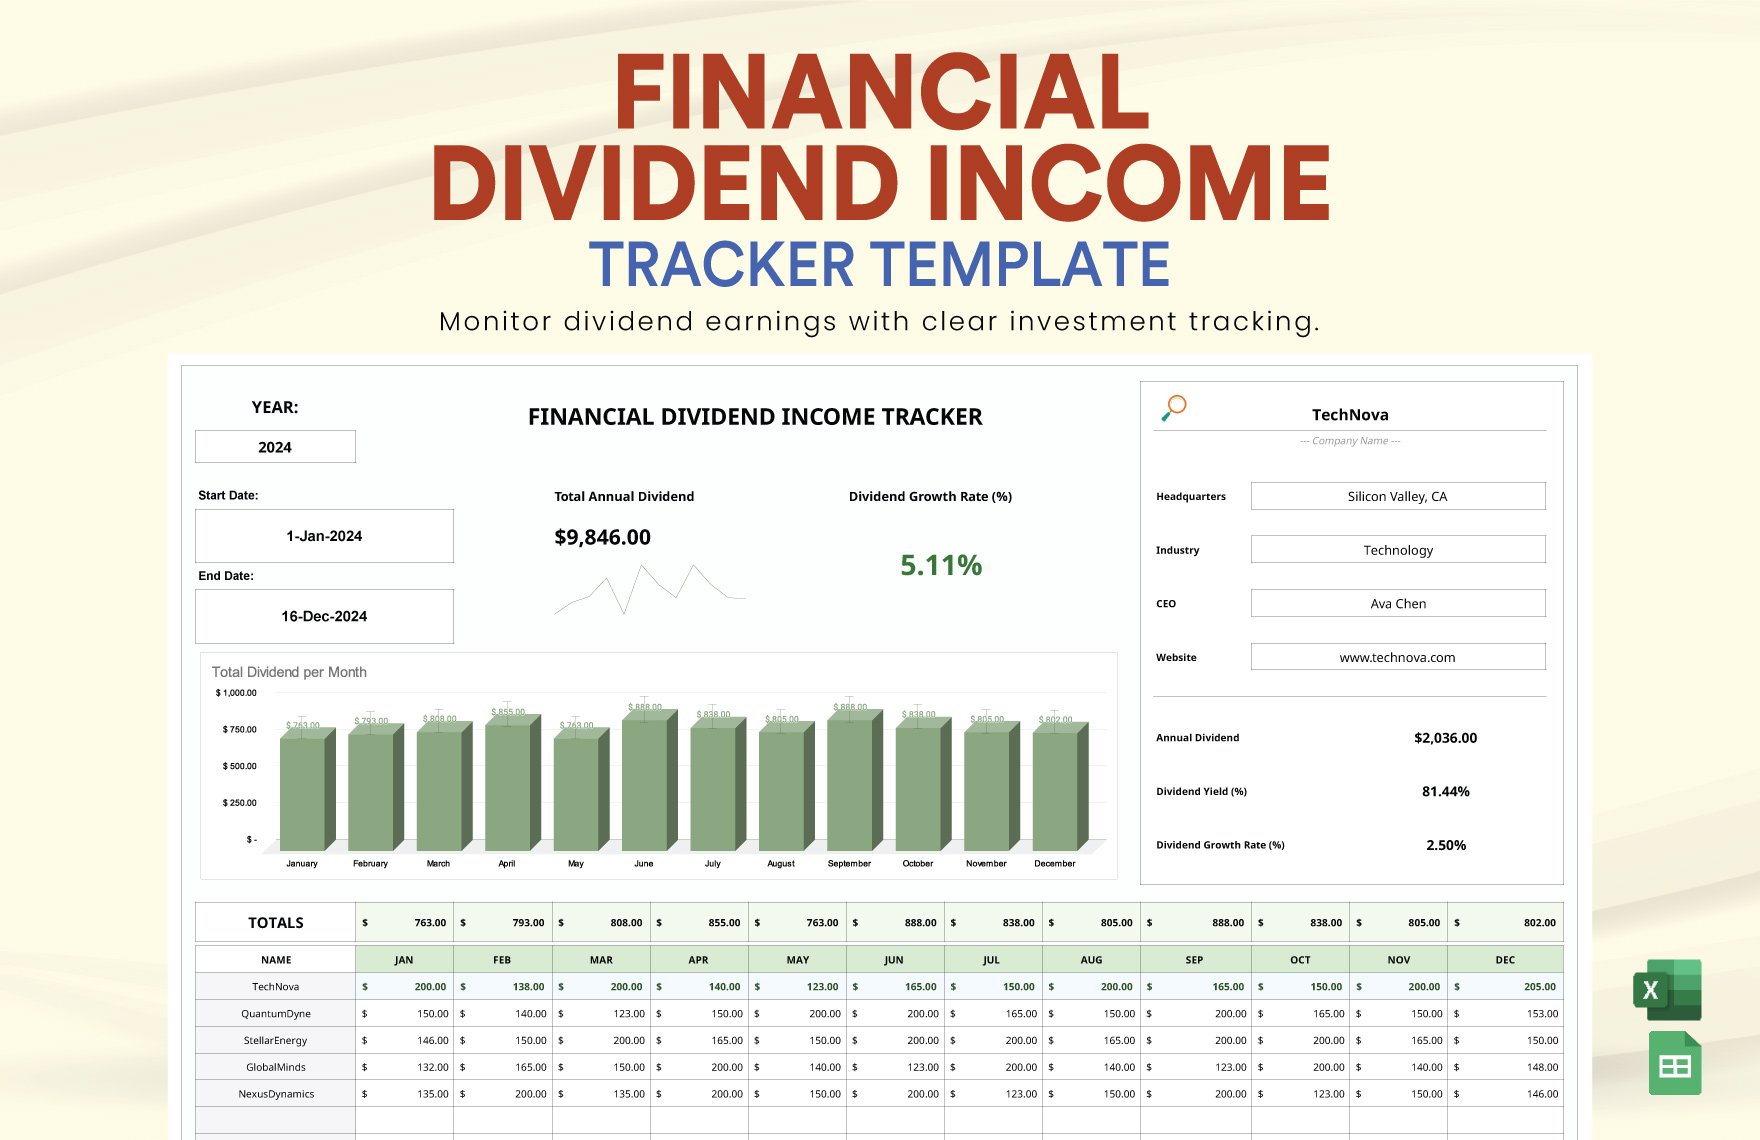 Financial Dividend Income Tracker Template in Excel, Google Sheets